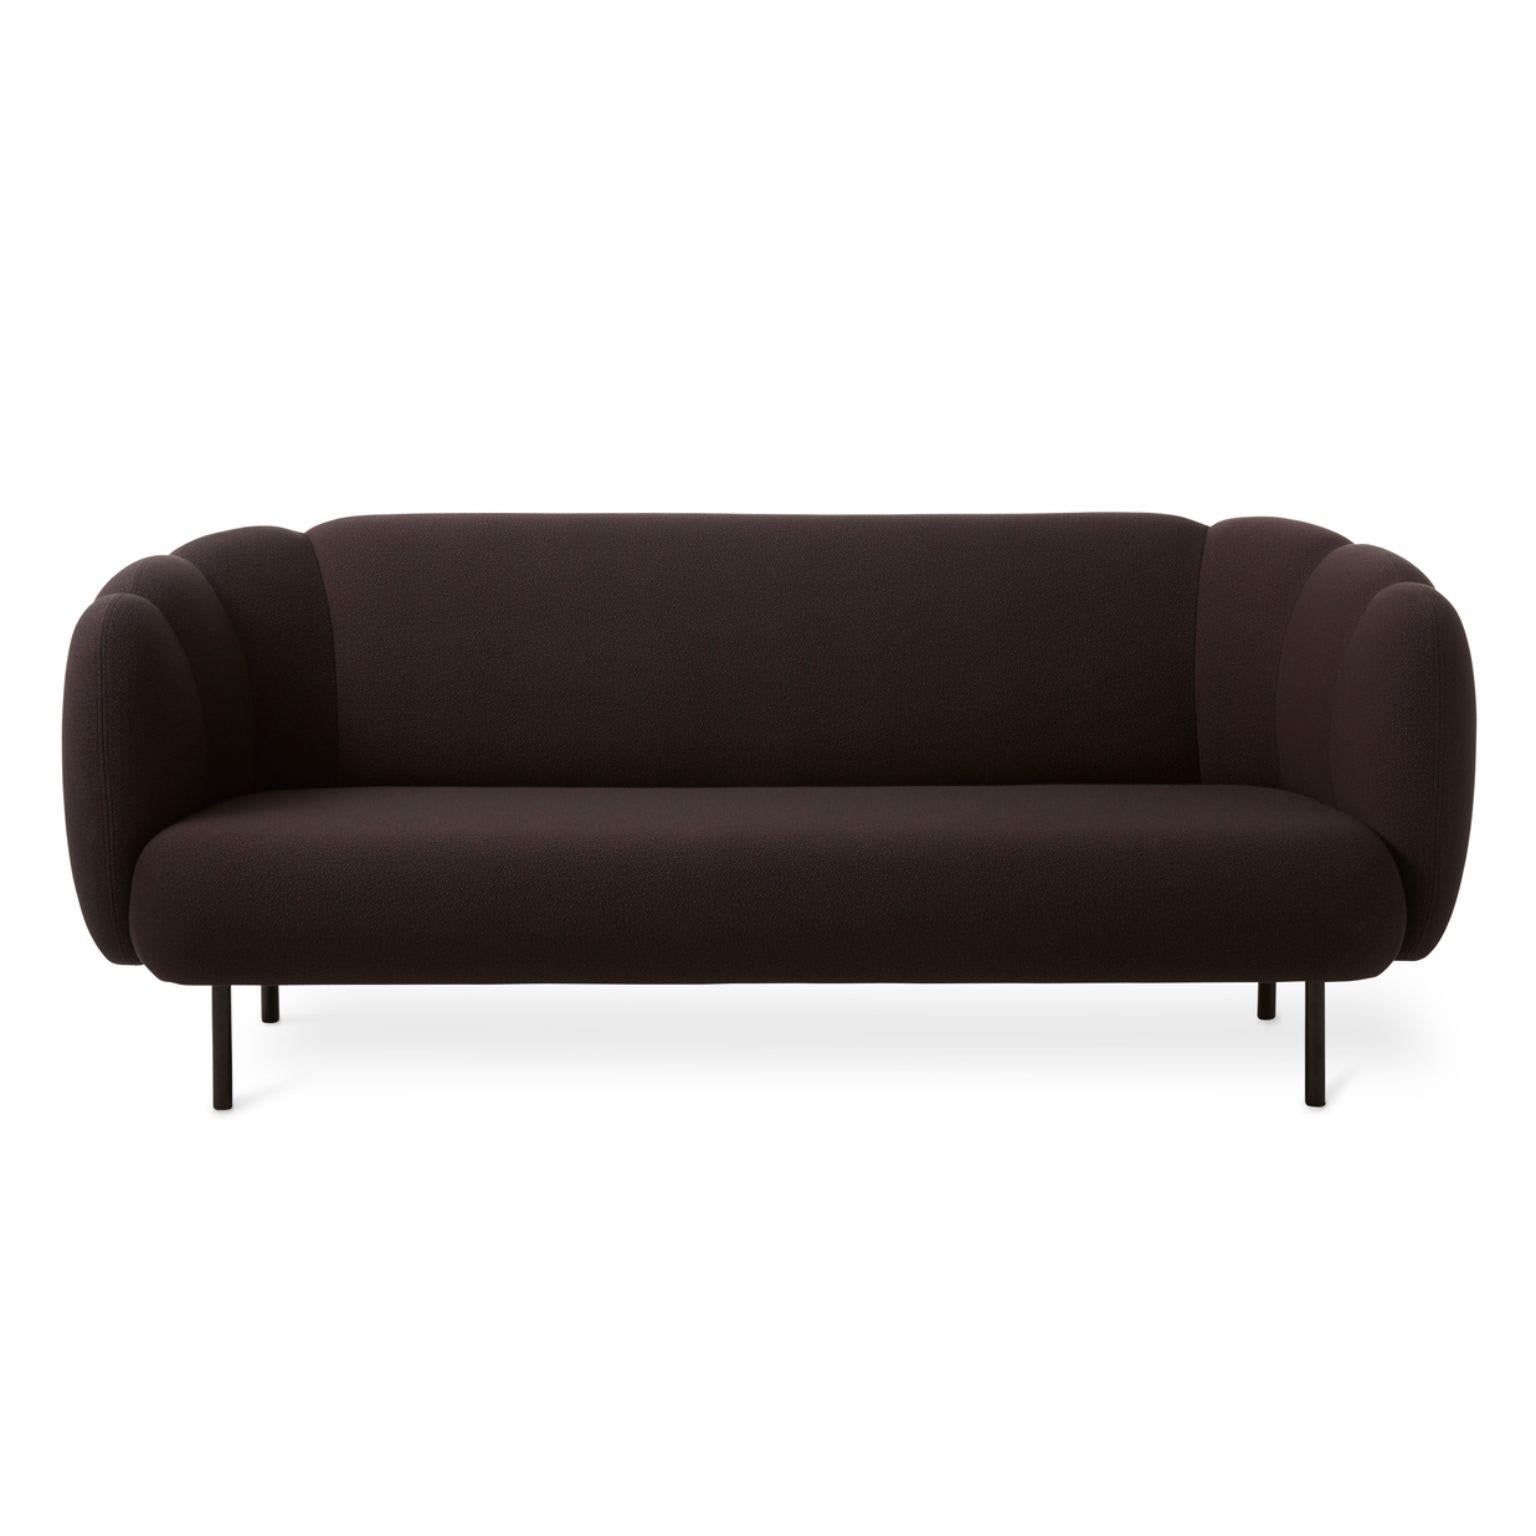 Caper 3 seater with stitches sprinkles eggplant by Warm Nordic.
Dimensions: D200 x W84 x H 80 cm.
Material: textile upholstery, wooden frame, powder coated black steel legs.
Weight: 55.5 kg
Also available in different colours and finishes.